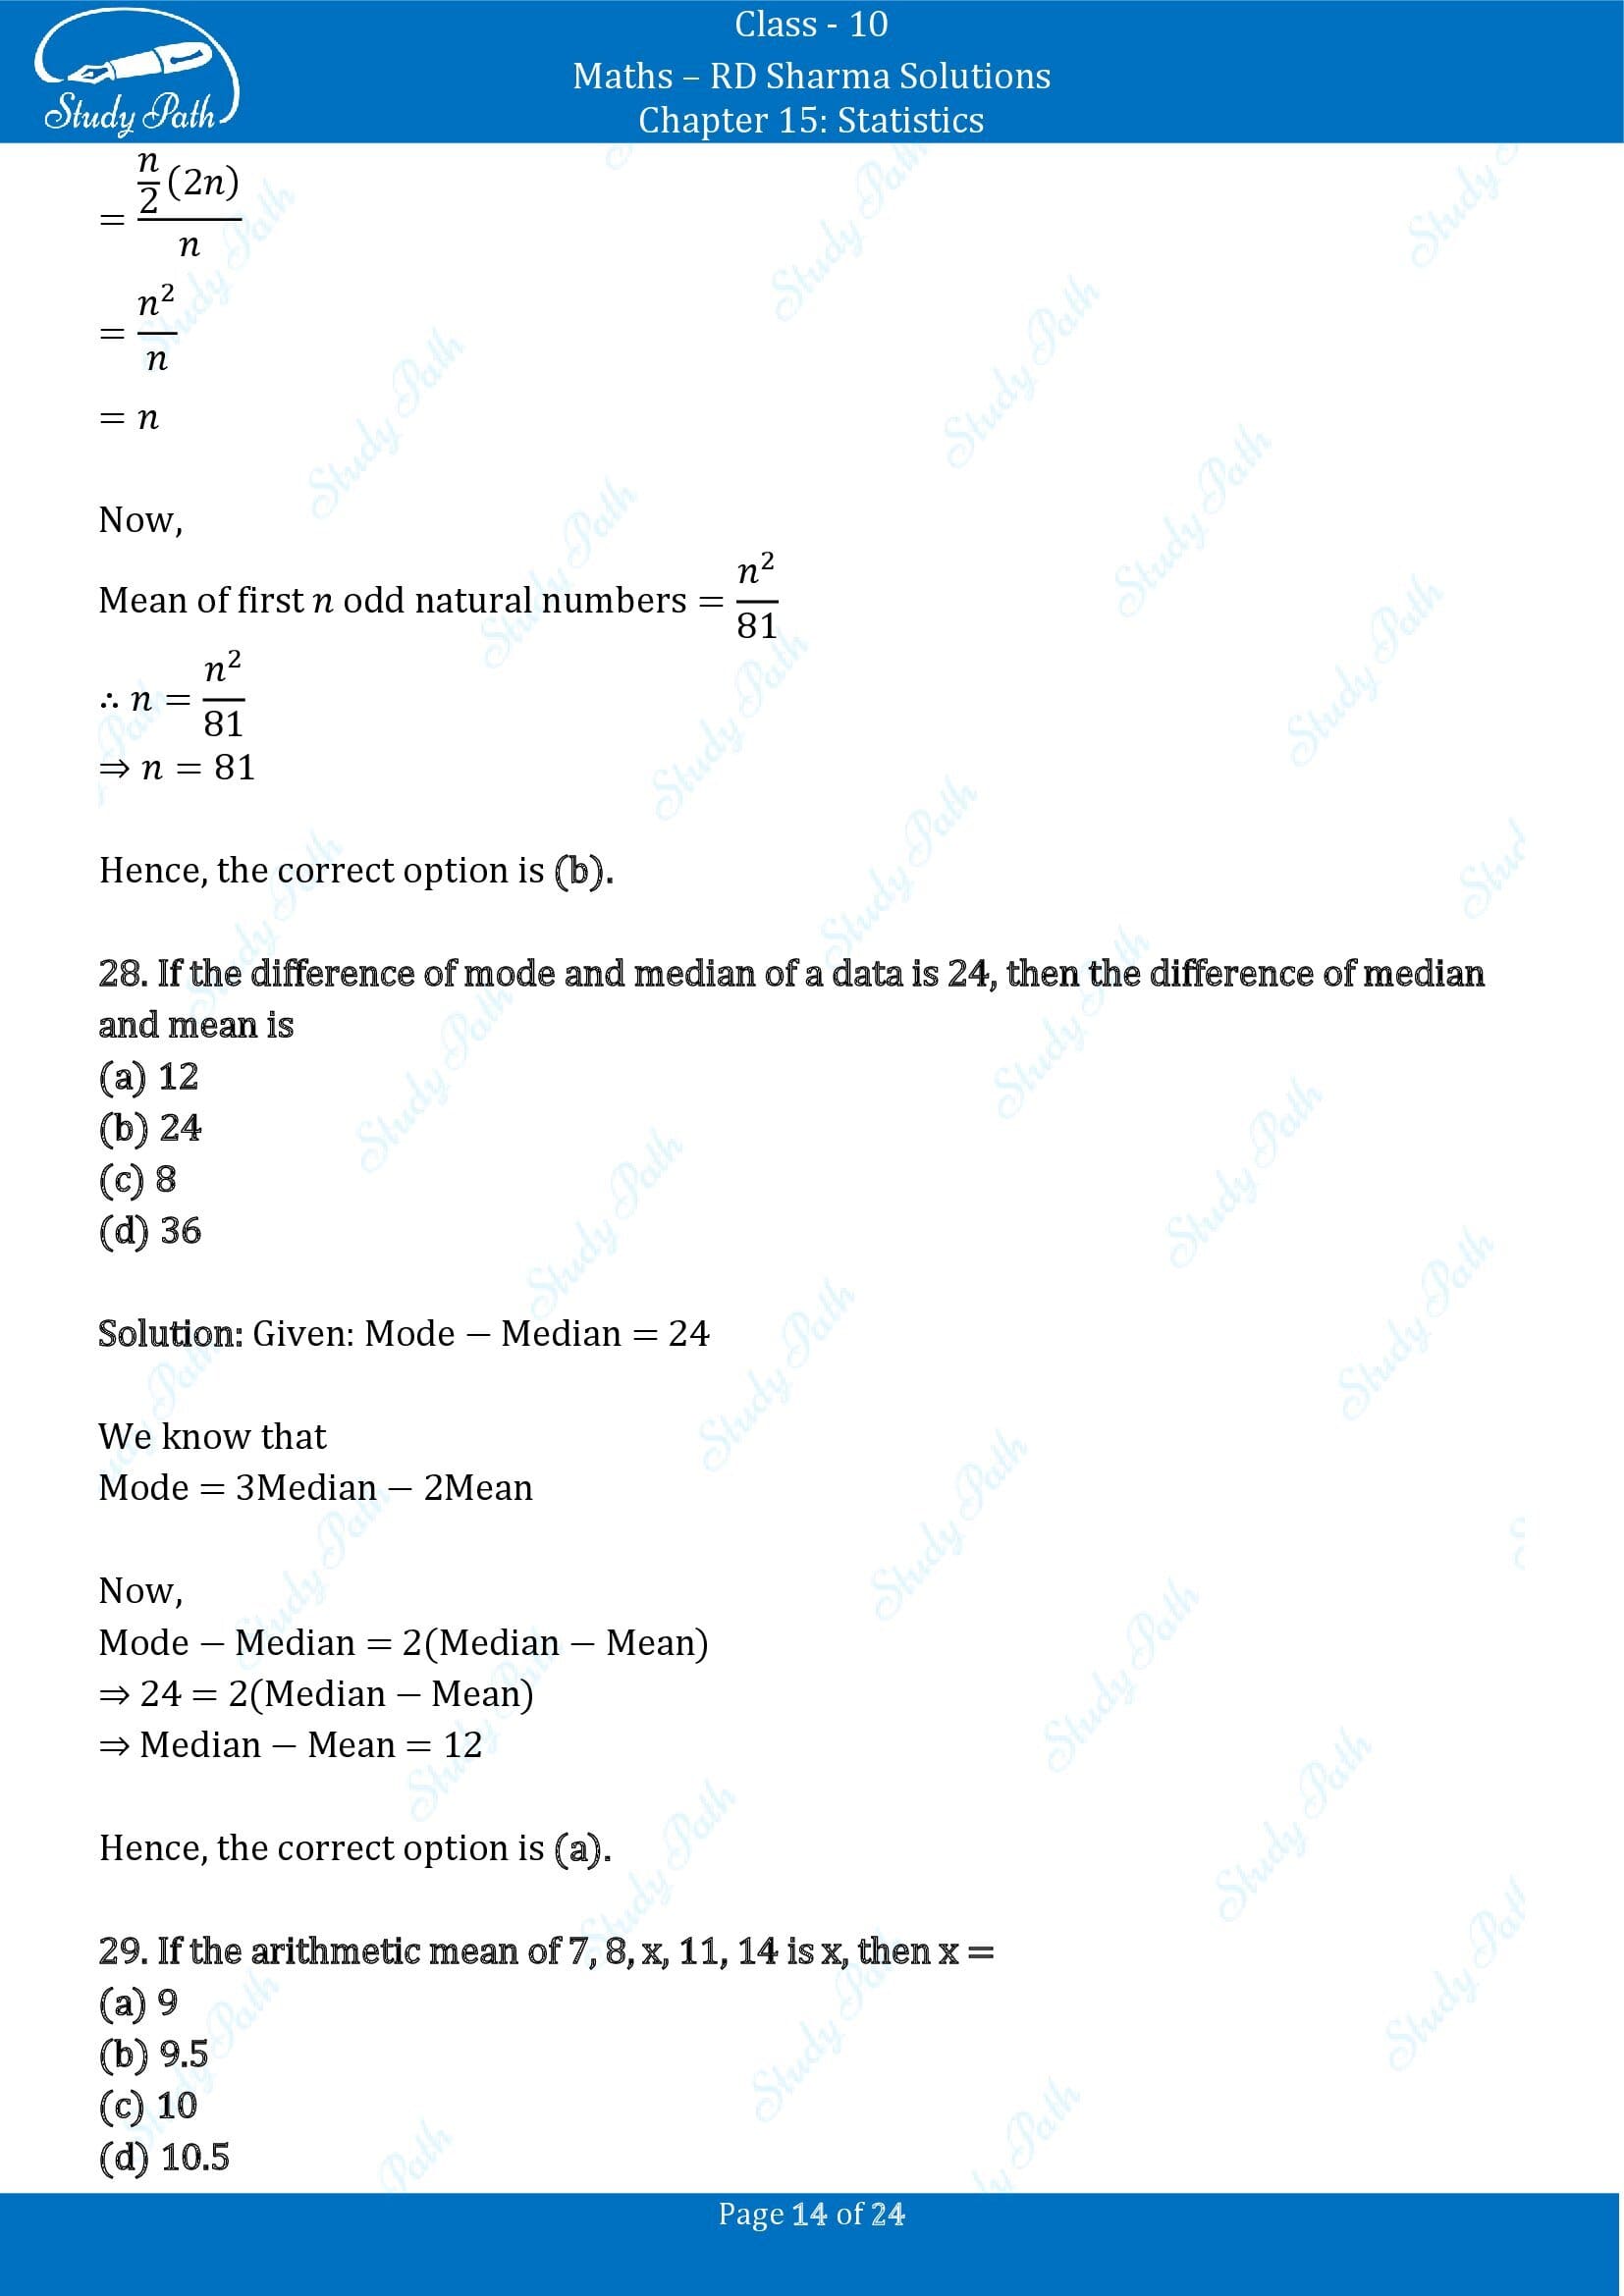 RD Sharma Solutions Class 10 Chapter 15 Statistics Multiple Choice Question MCQs 00014